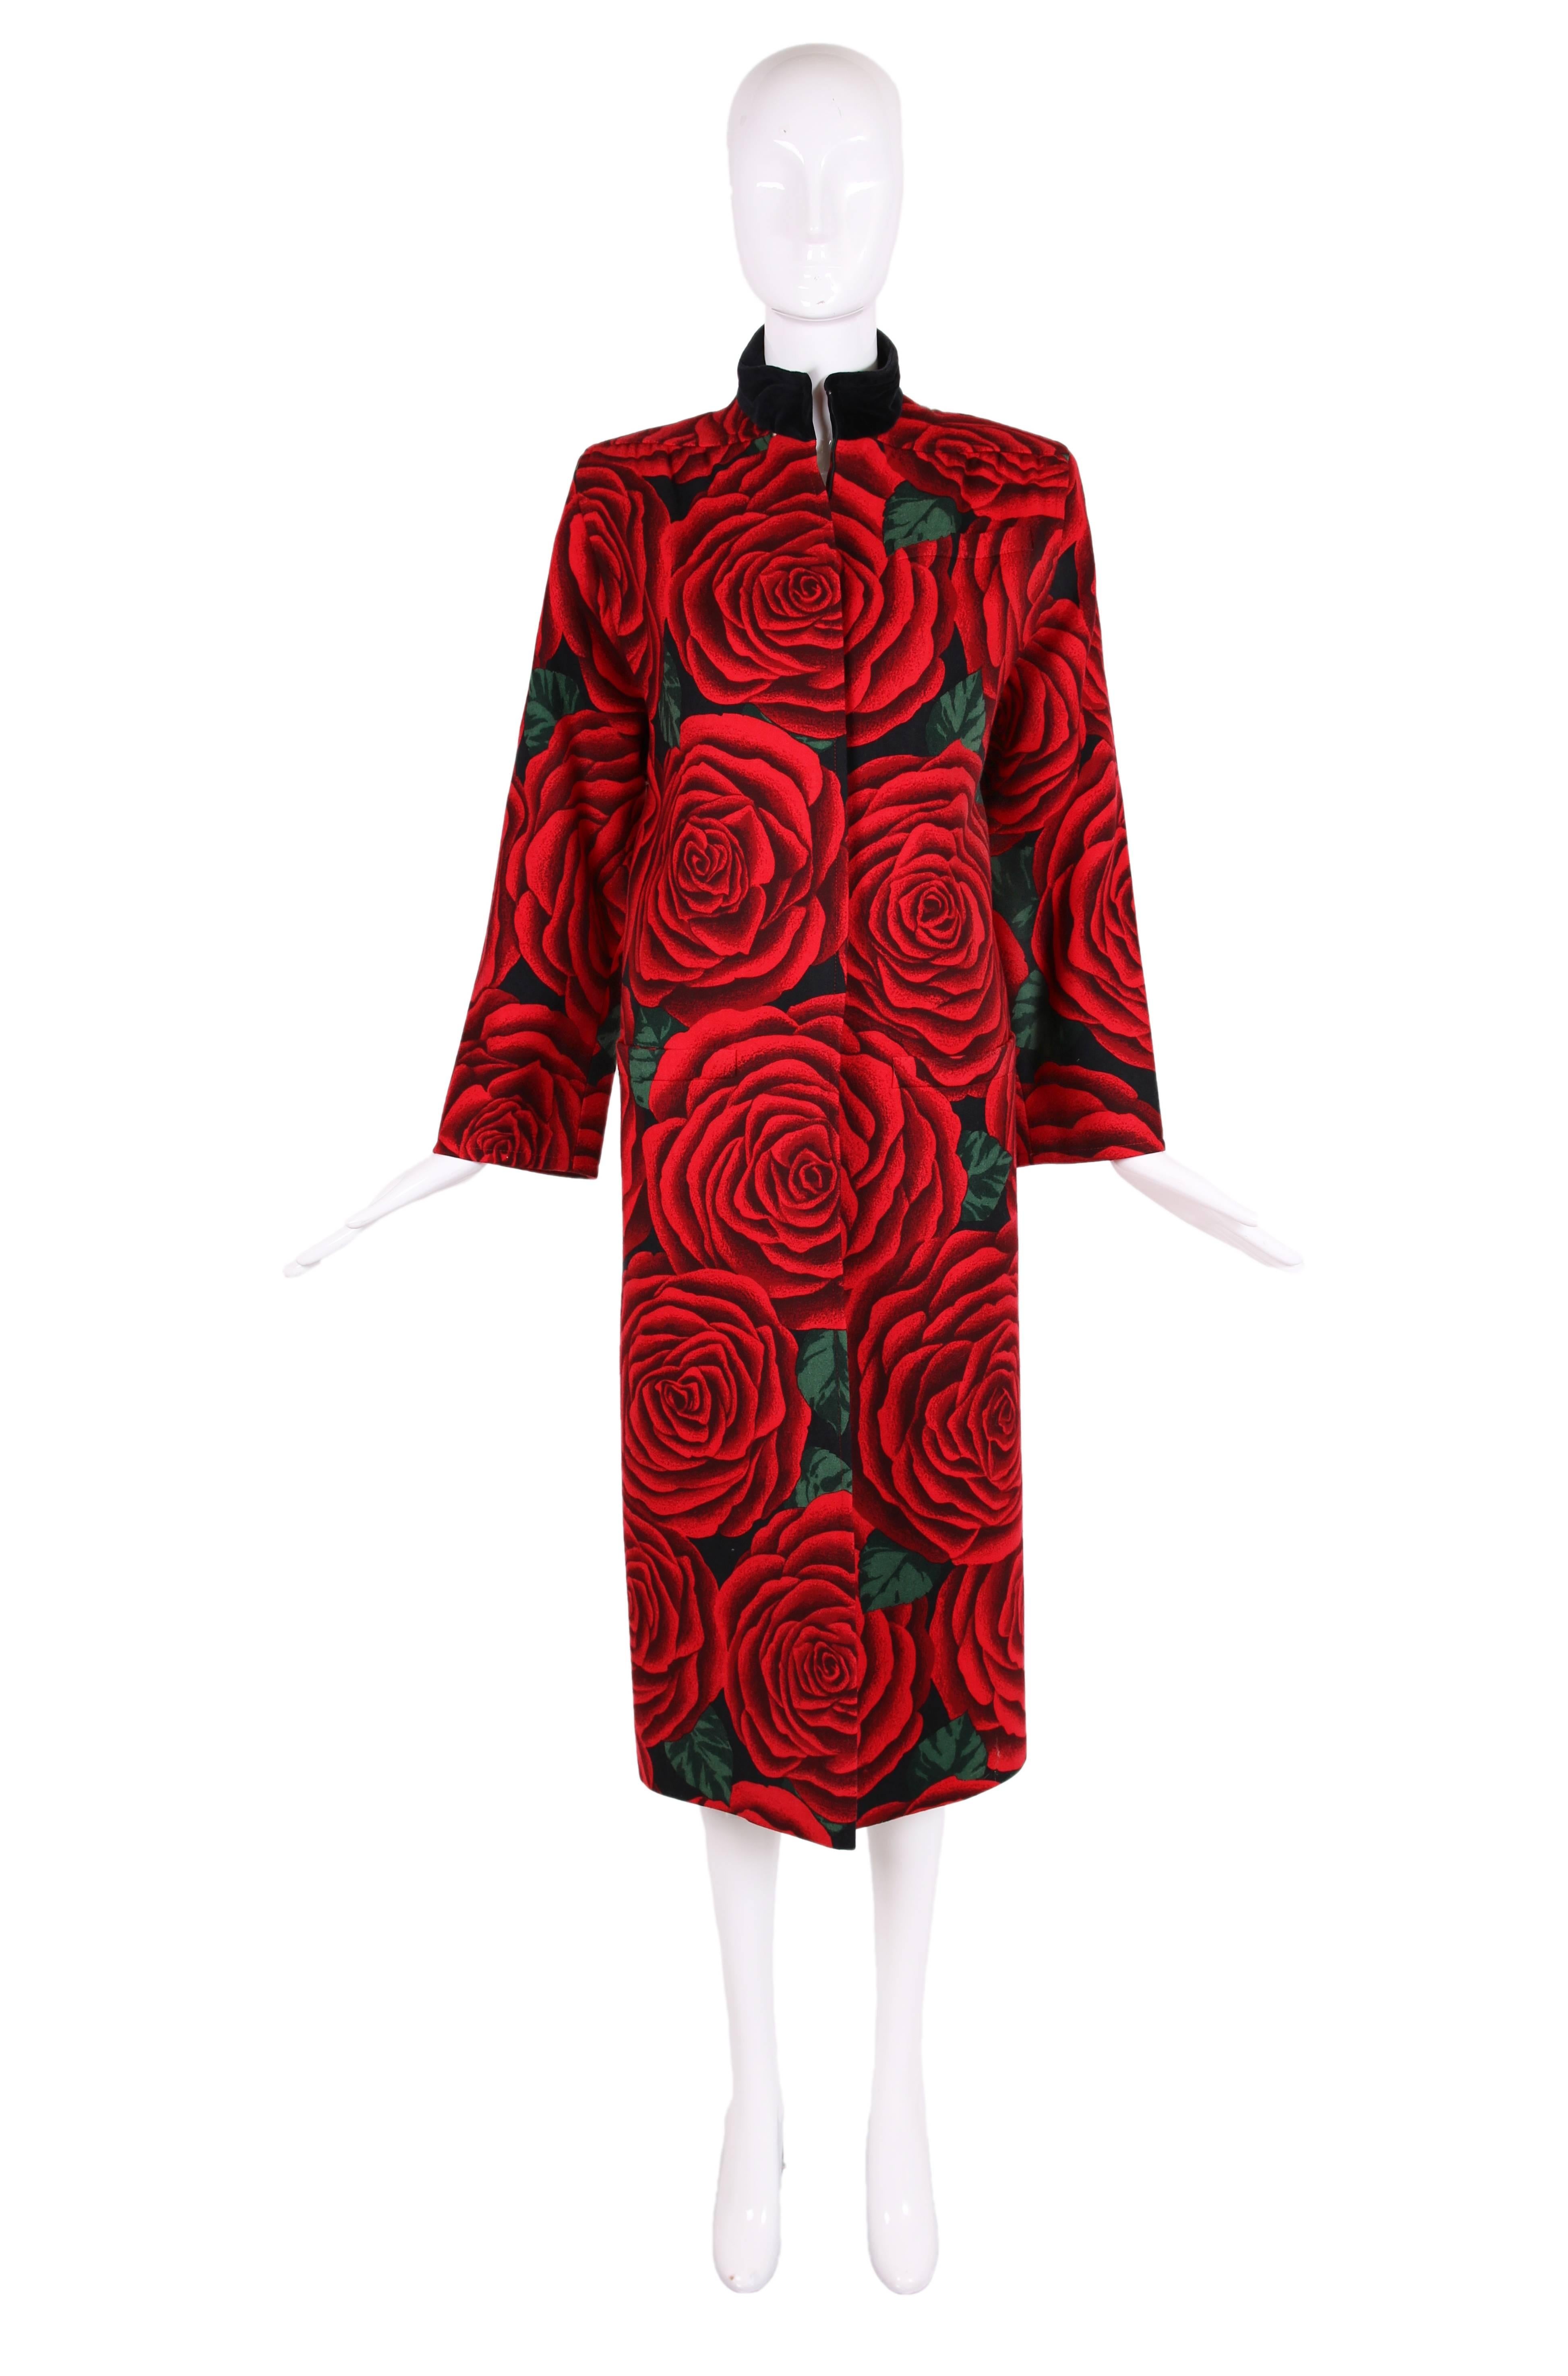 Vintage Valentino wool coat with red, black and green print featuring oversized cabbage rose print. Features zipper up center front, three frontal pockets, black velvet collar, quilted silk interior lining and oversized shoulders. In excellent